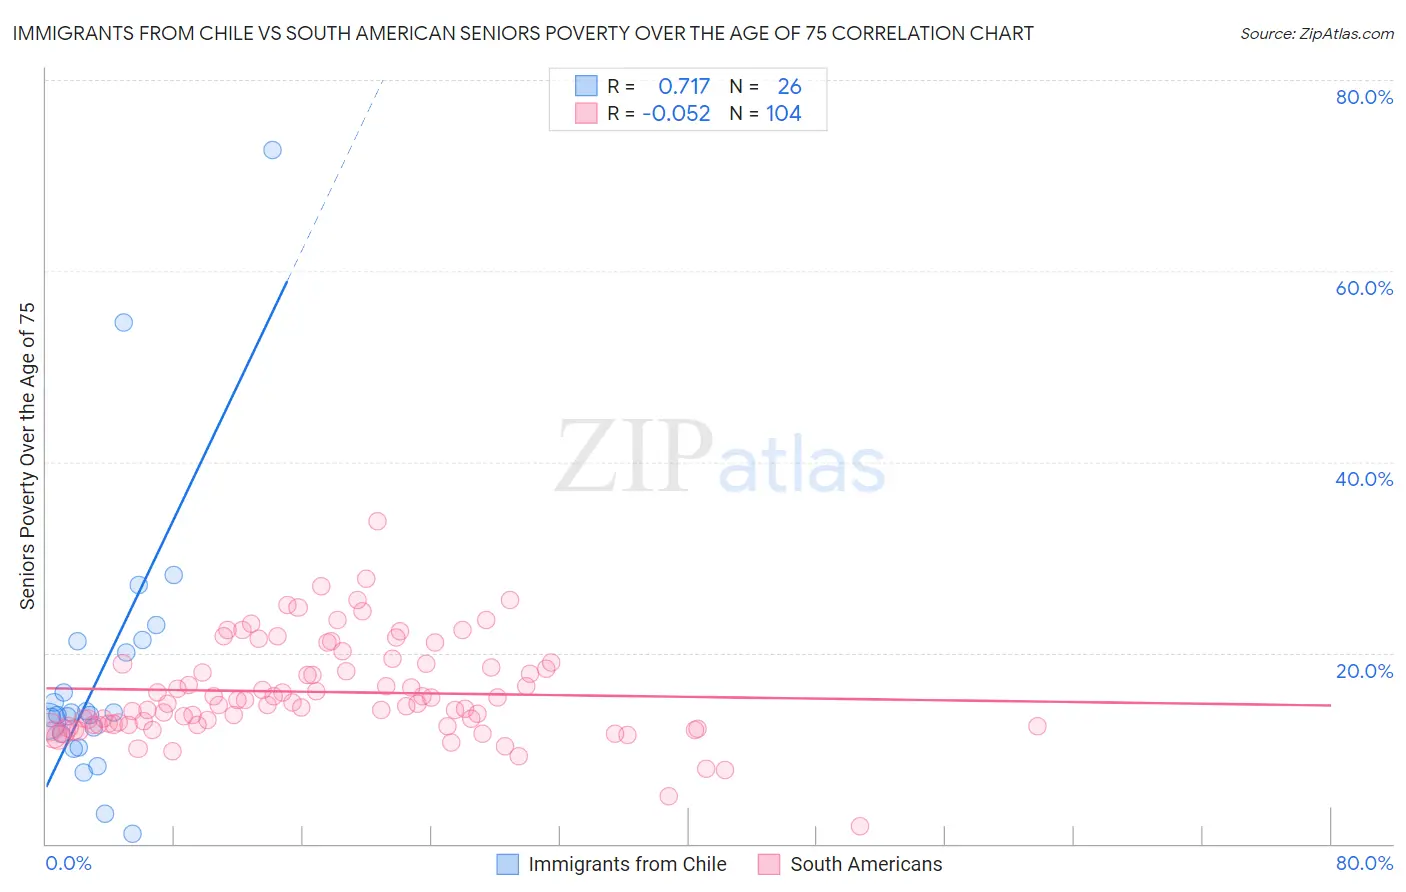 Immigrants from Chile vs South American Seniors Poverty Over the Age of 75